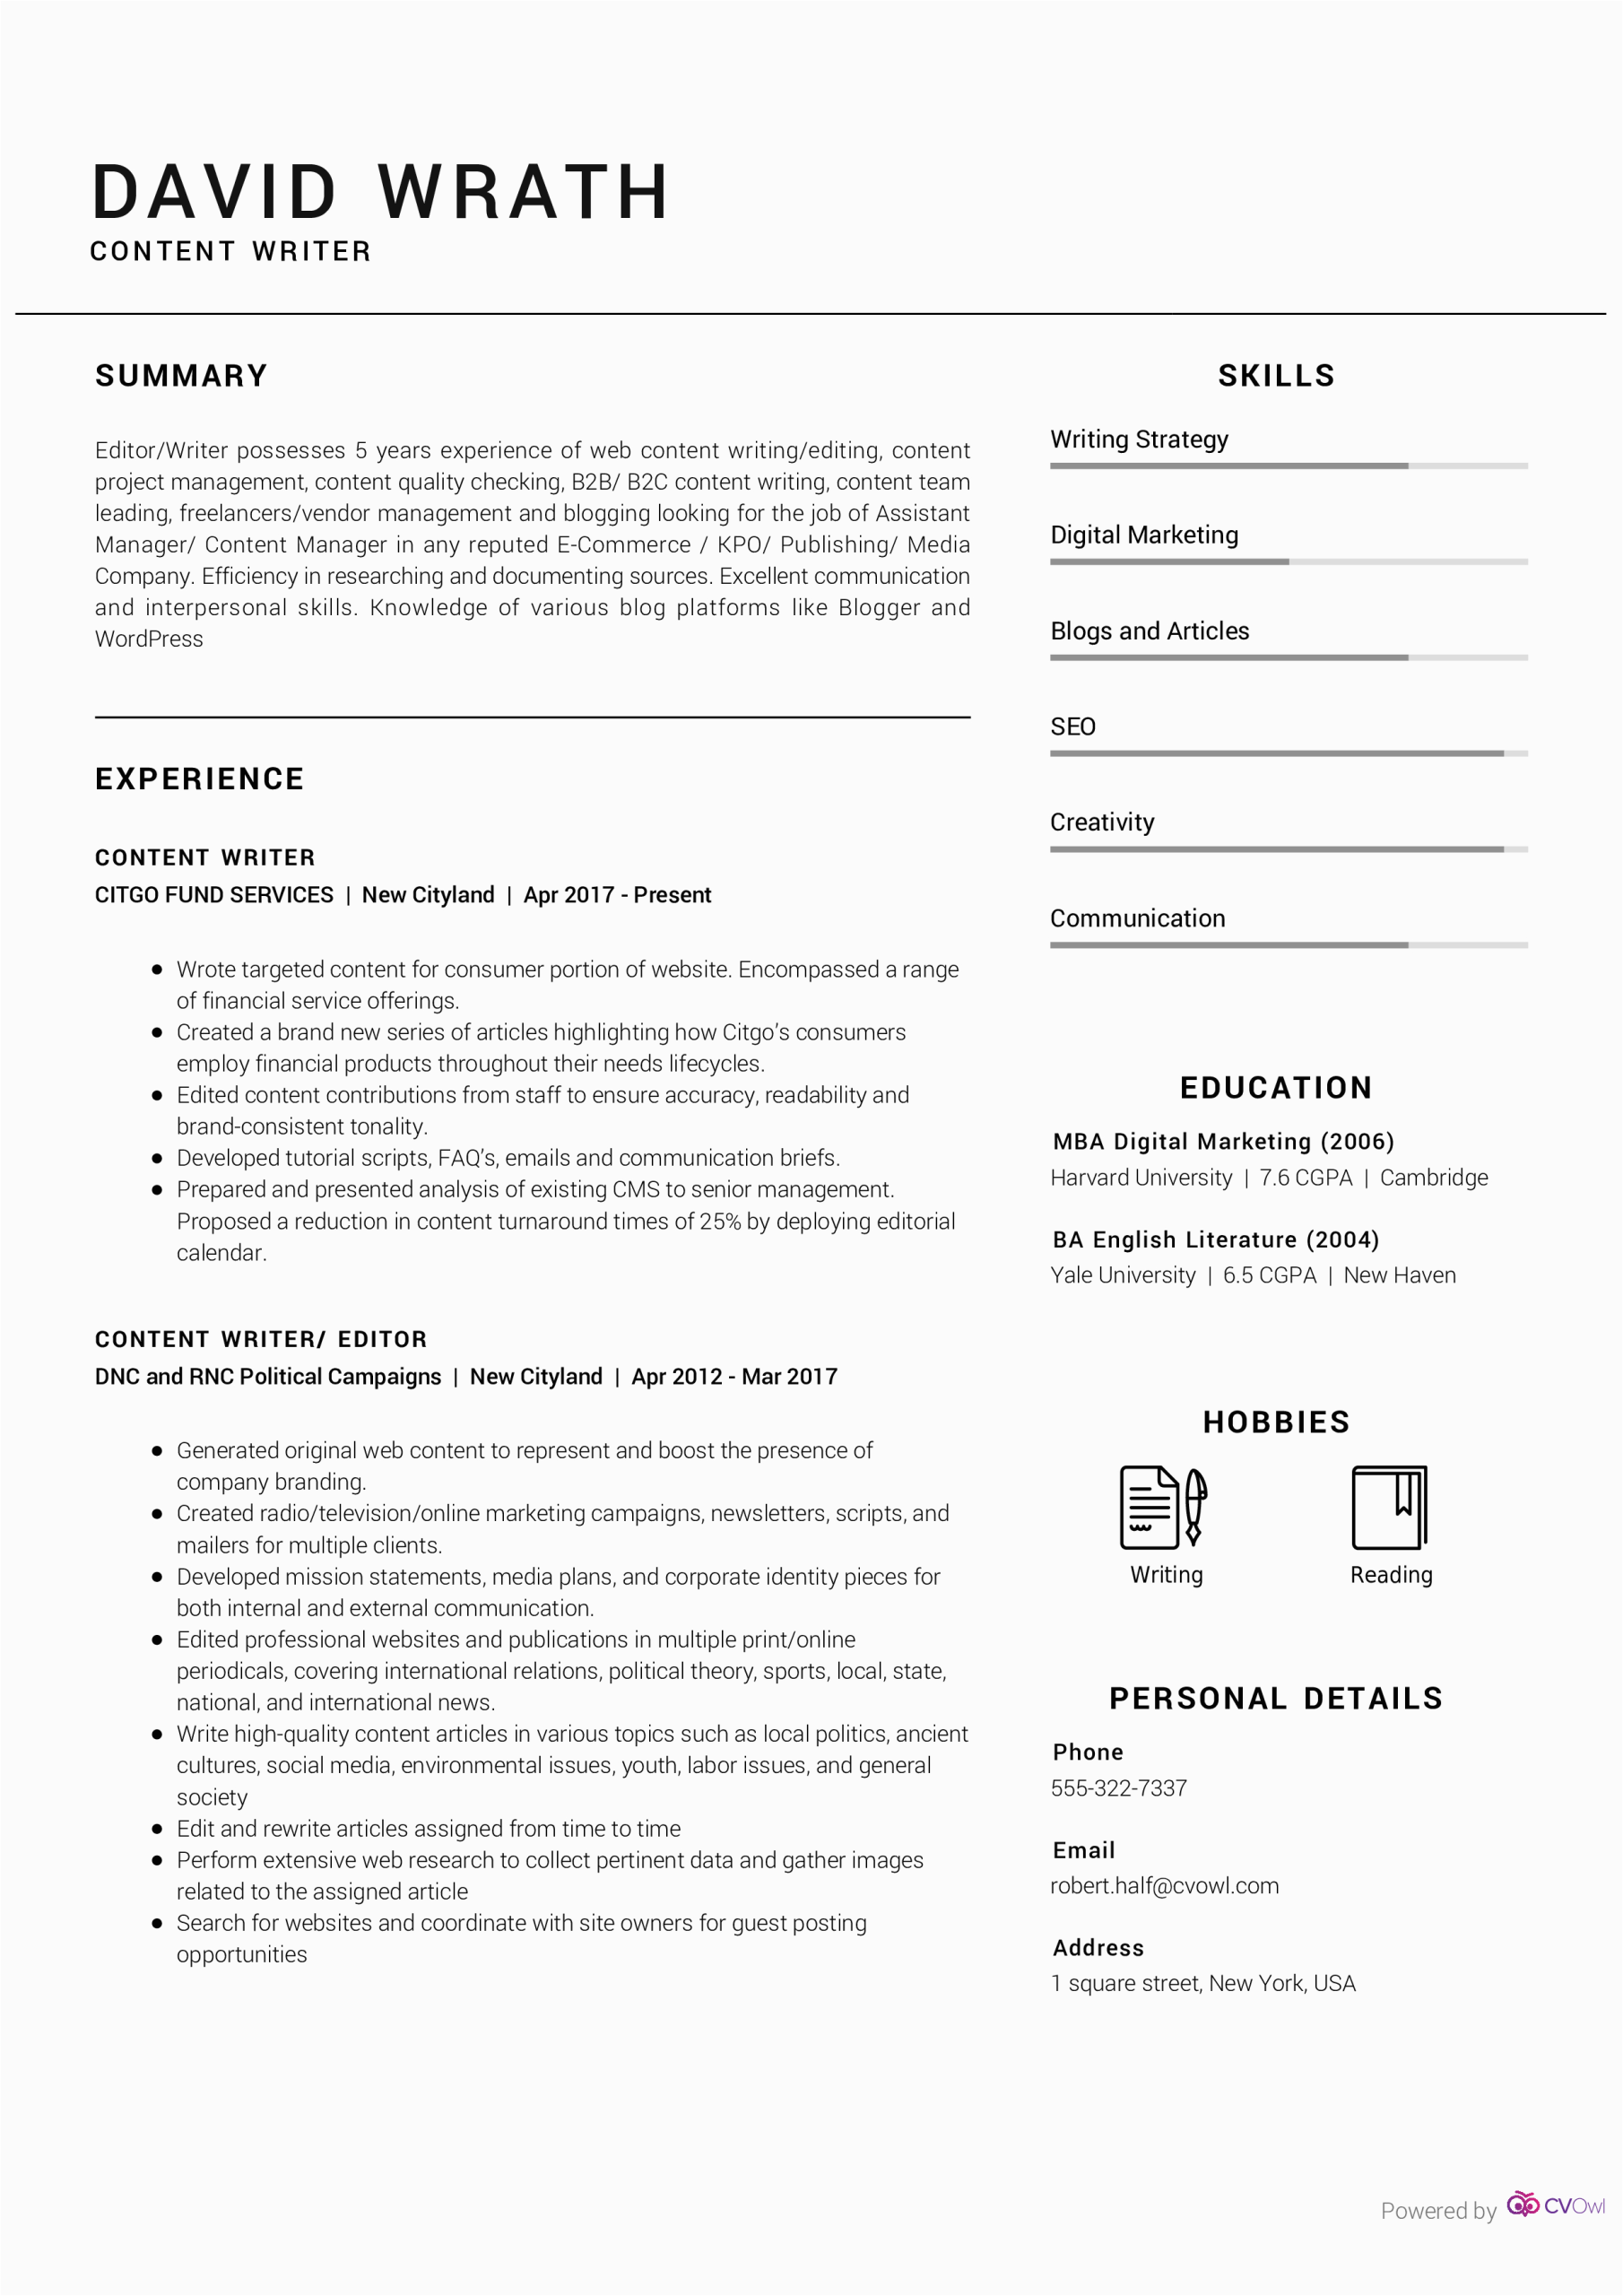 Content Writing Resume Samples for Freshers 23 Resume Expamples